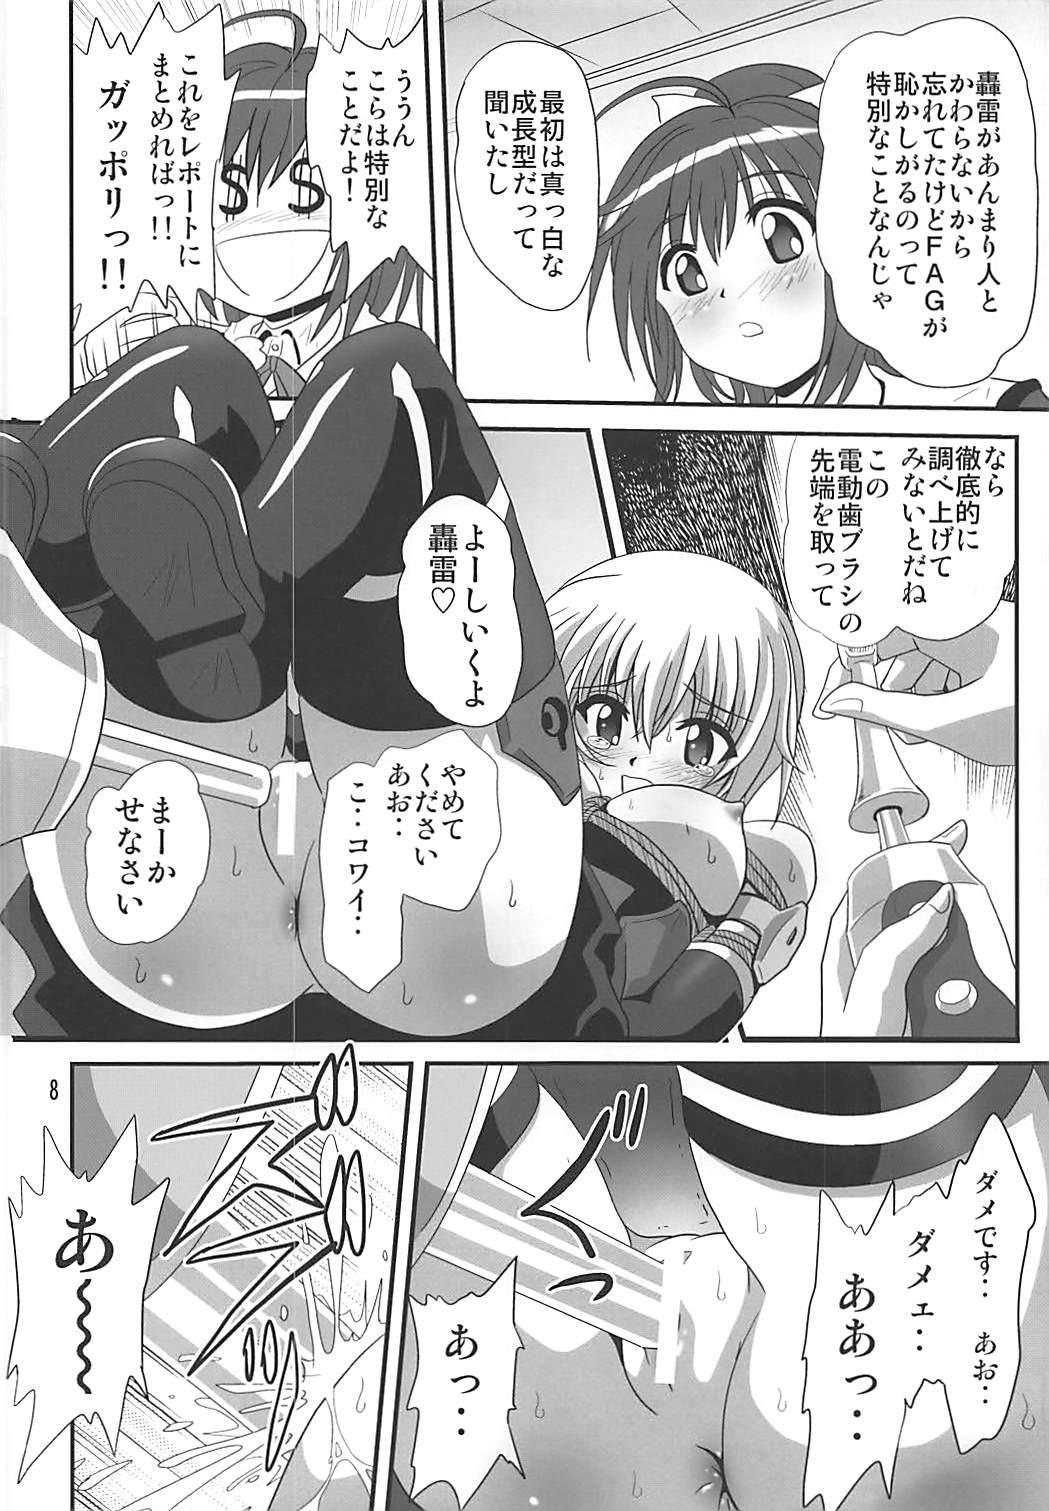 Amazing Bind Arms - Frame arms girl Hot Wife - Page 7